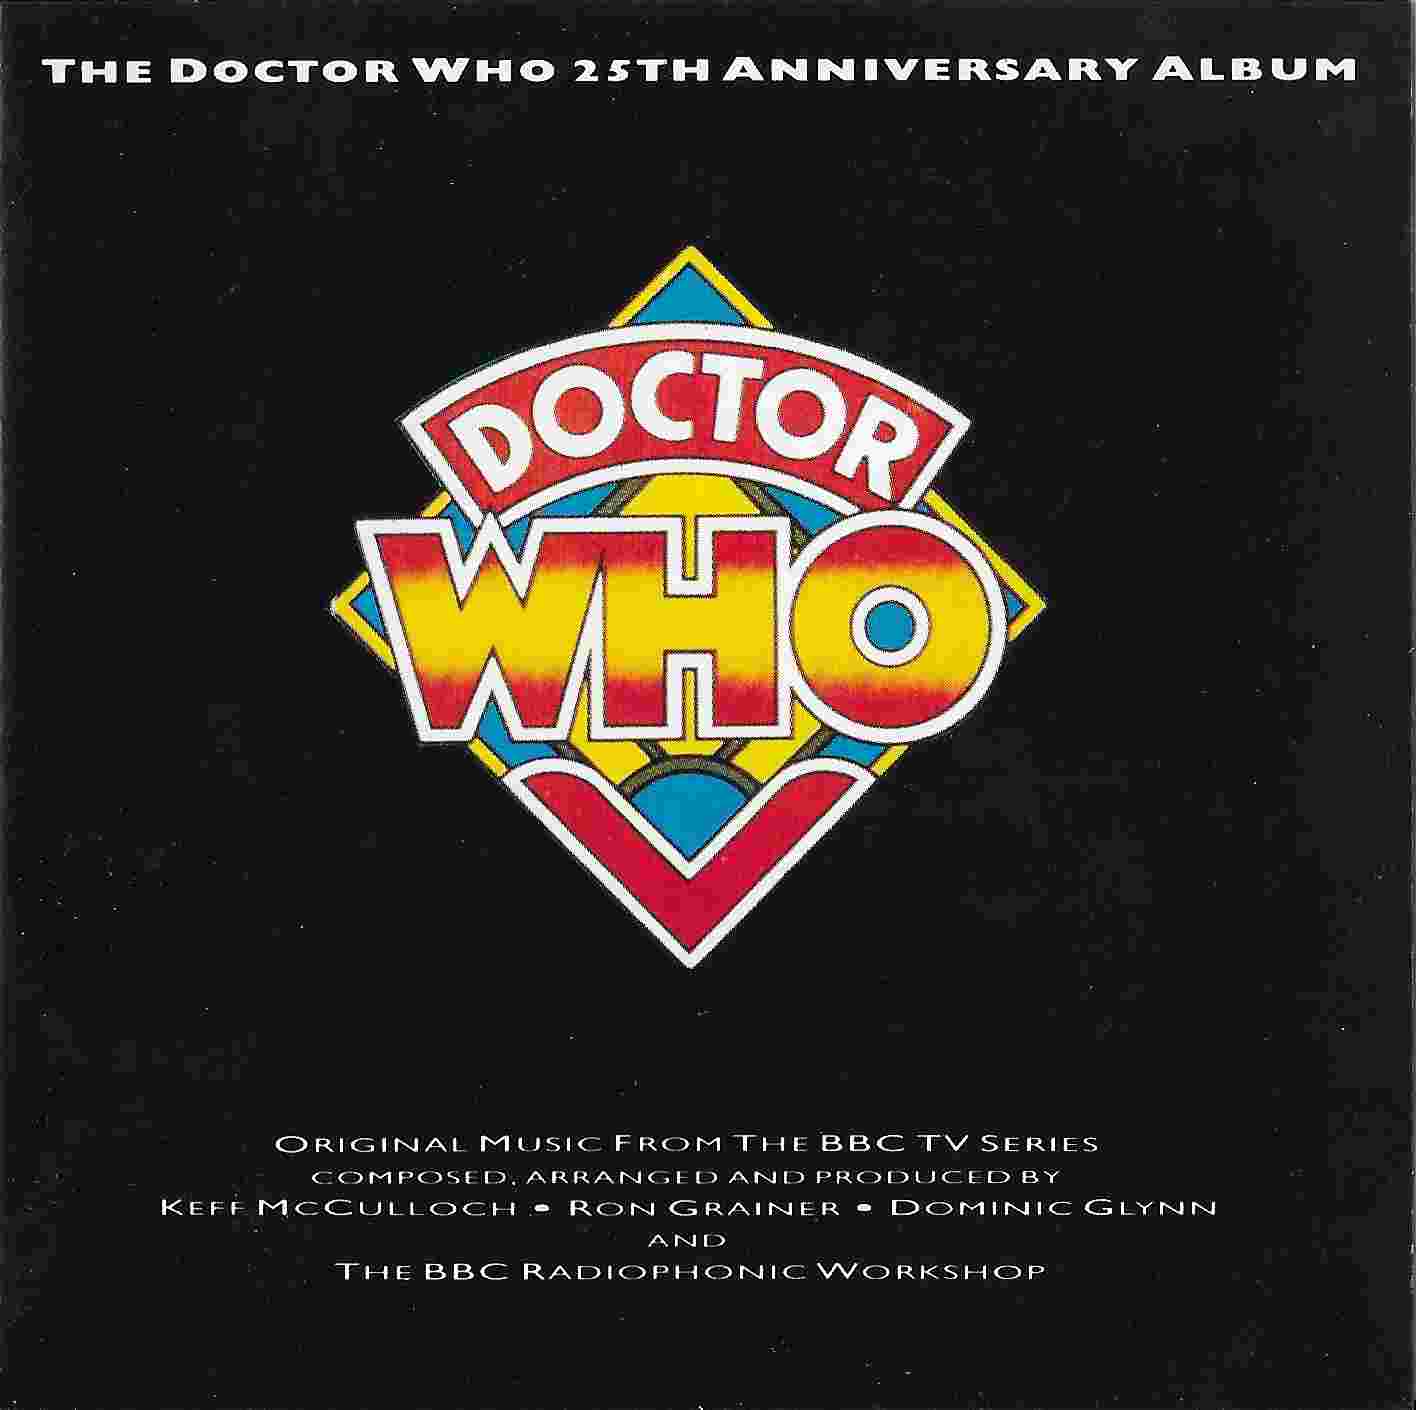 Picture of BBCCD707 Doctor Who - 25th anniversary album by artist Ron Grainer / Dominic Glynn / Keff McCulloch from the BBC cds - Records and Tapes library